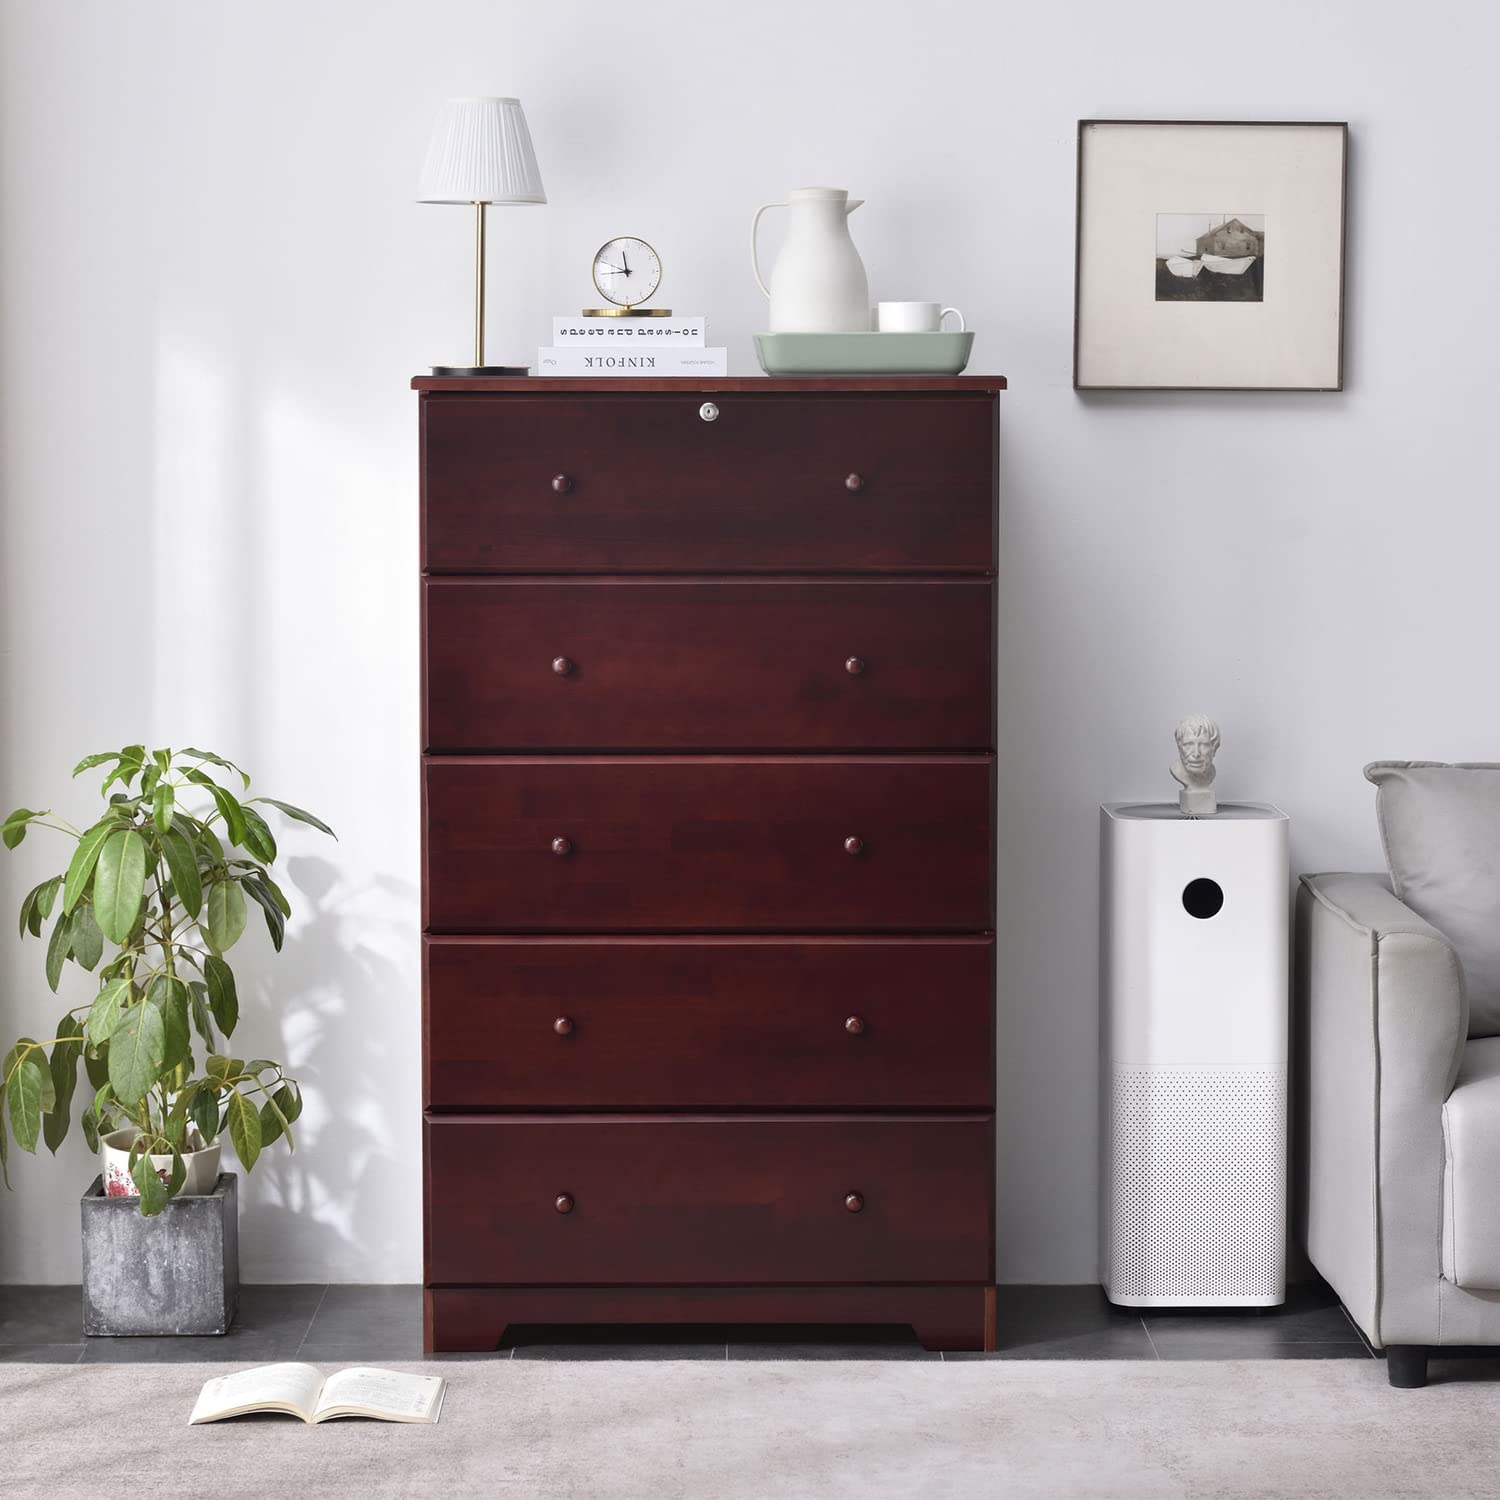 Better Home Products Isabela Solid Pine Wood 5 Drawer Chest Dresser in Mahogany